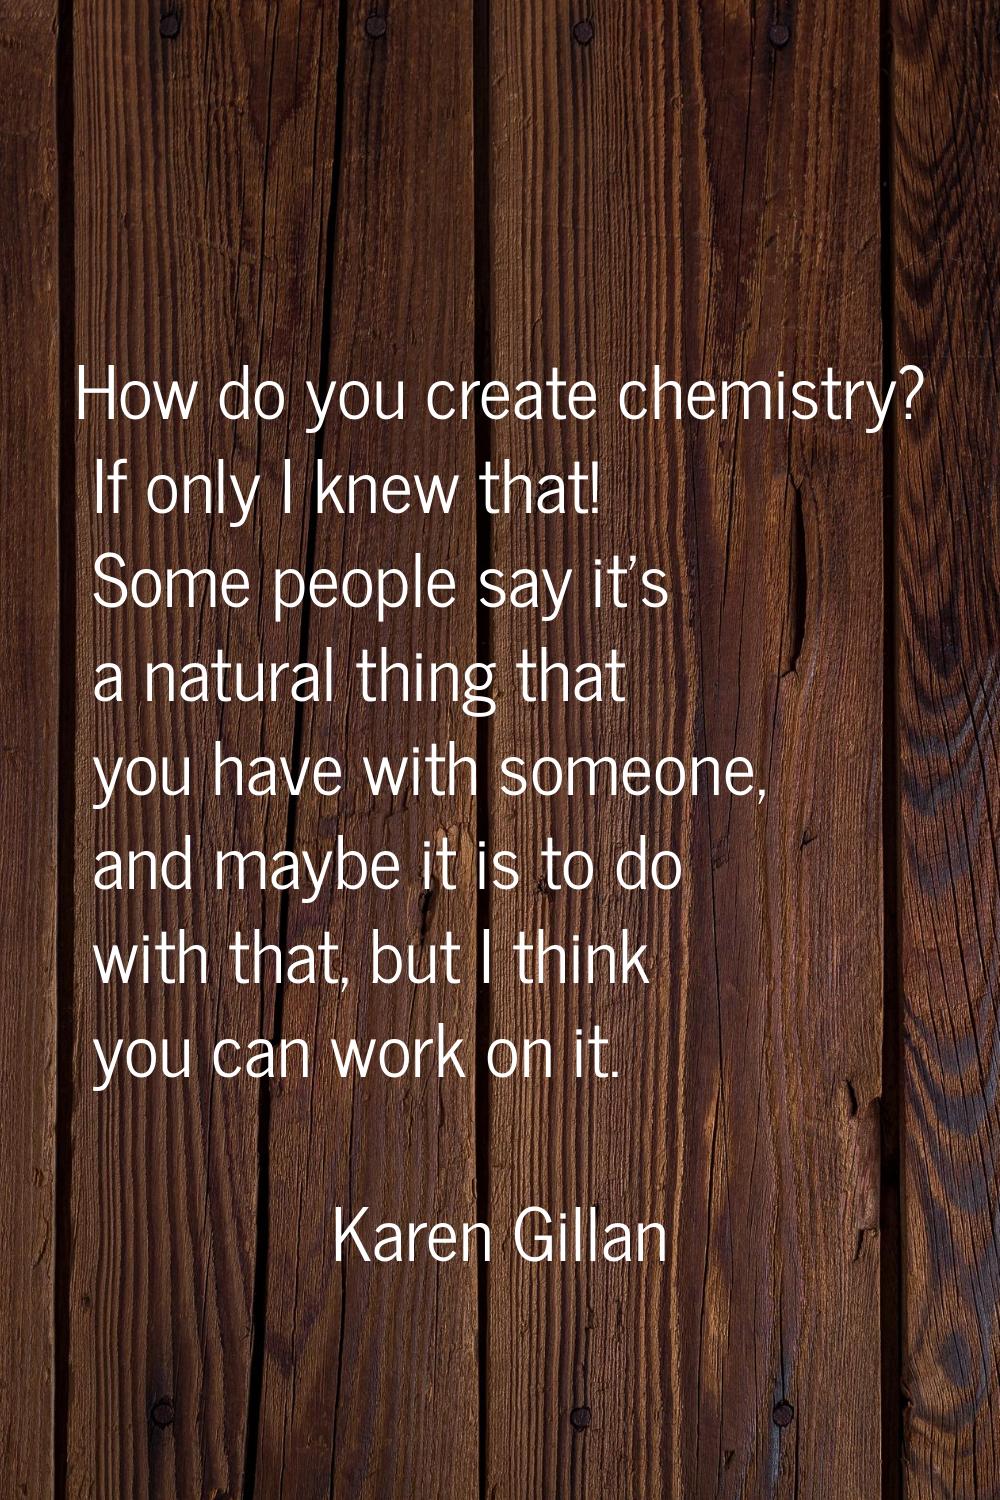 How do you create chemistry? If only I knew that! Some people say it's a natural thing that you hav